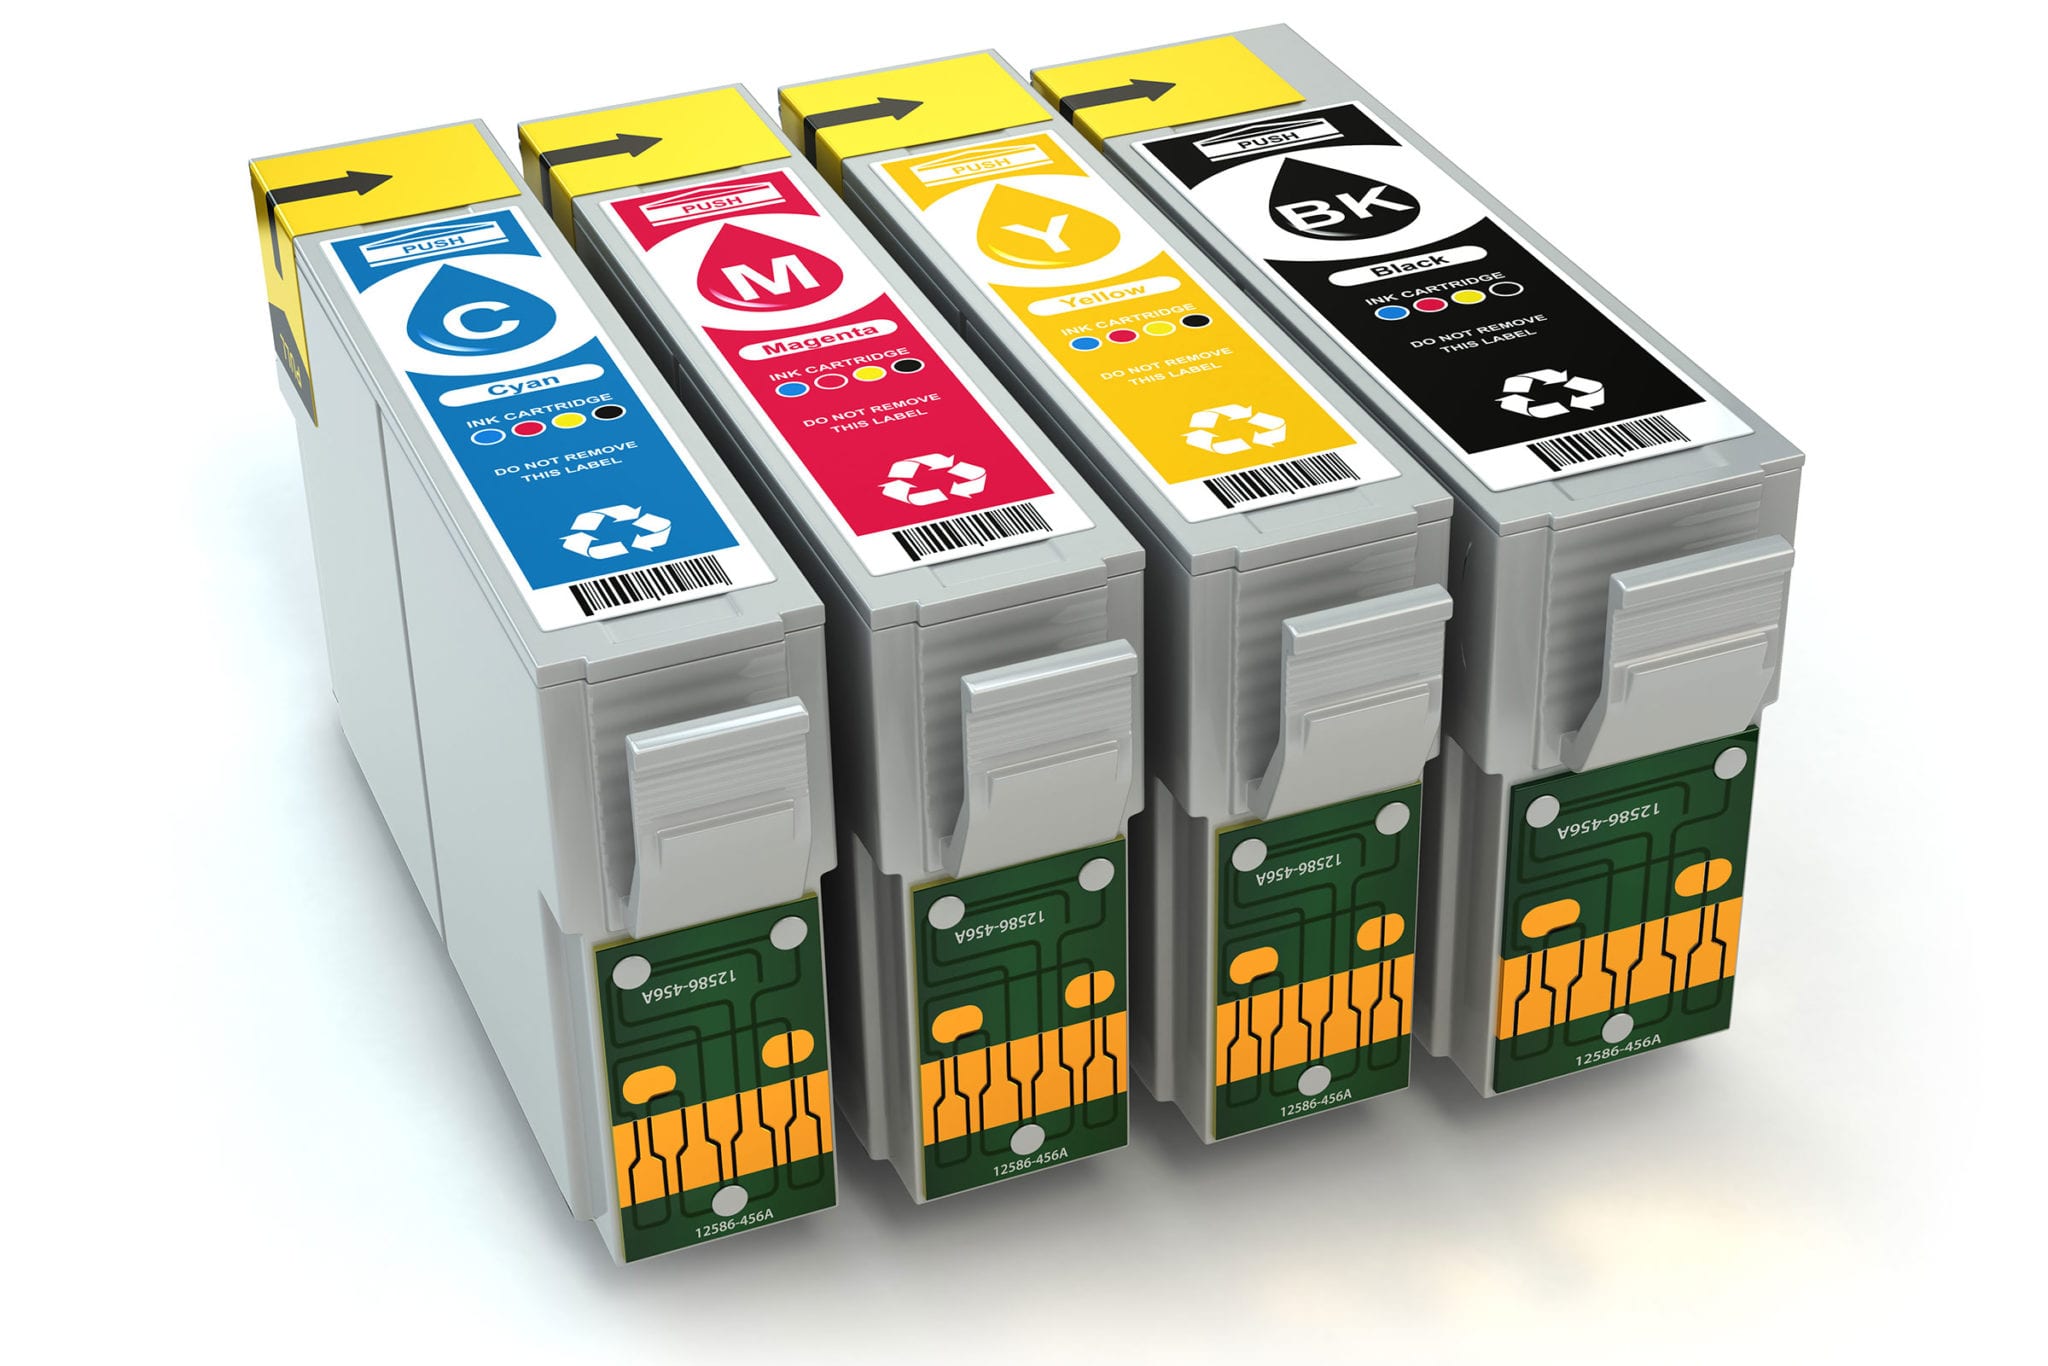 A Guide to Learn More About Printer Toner Cartridges - Tweak Your Biz